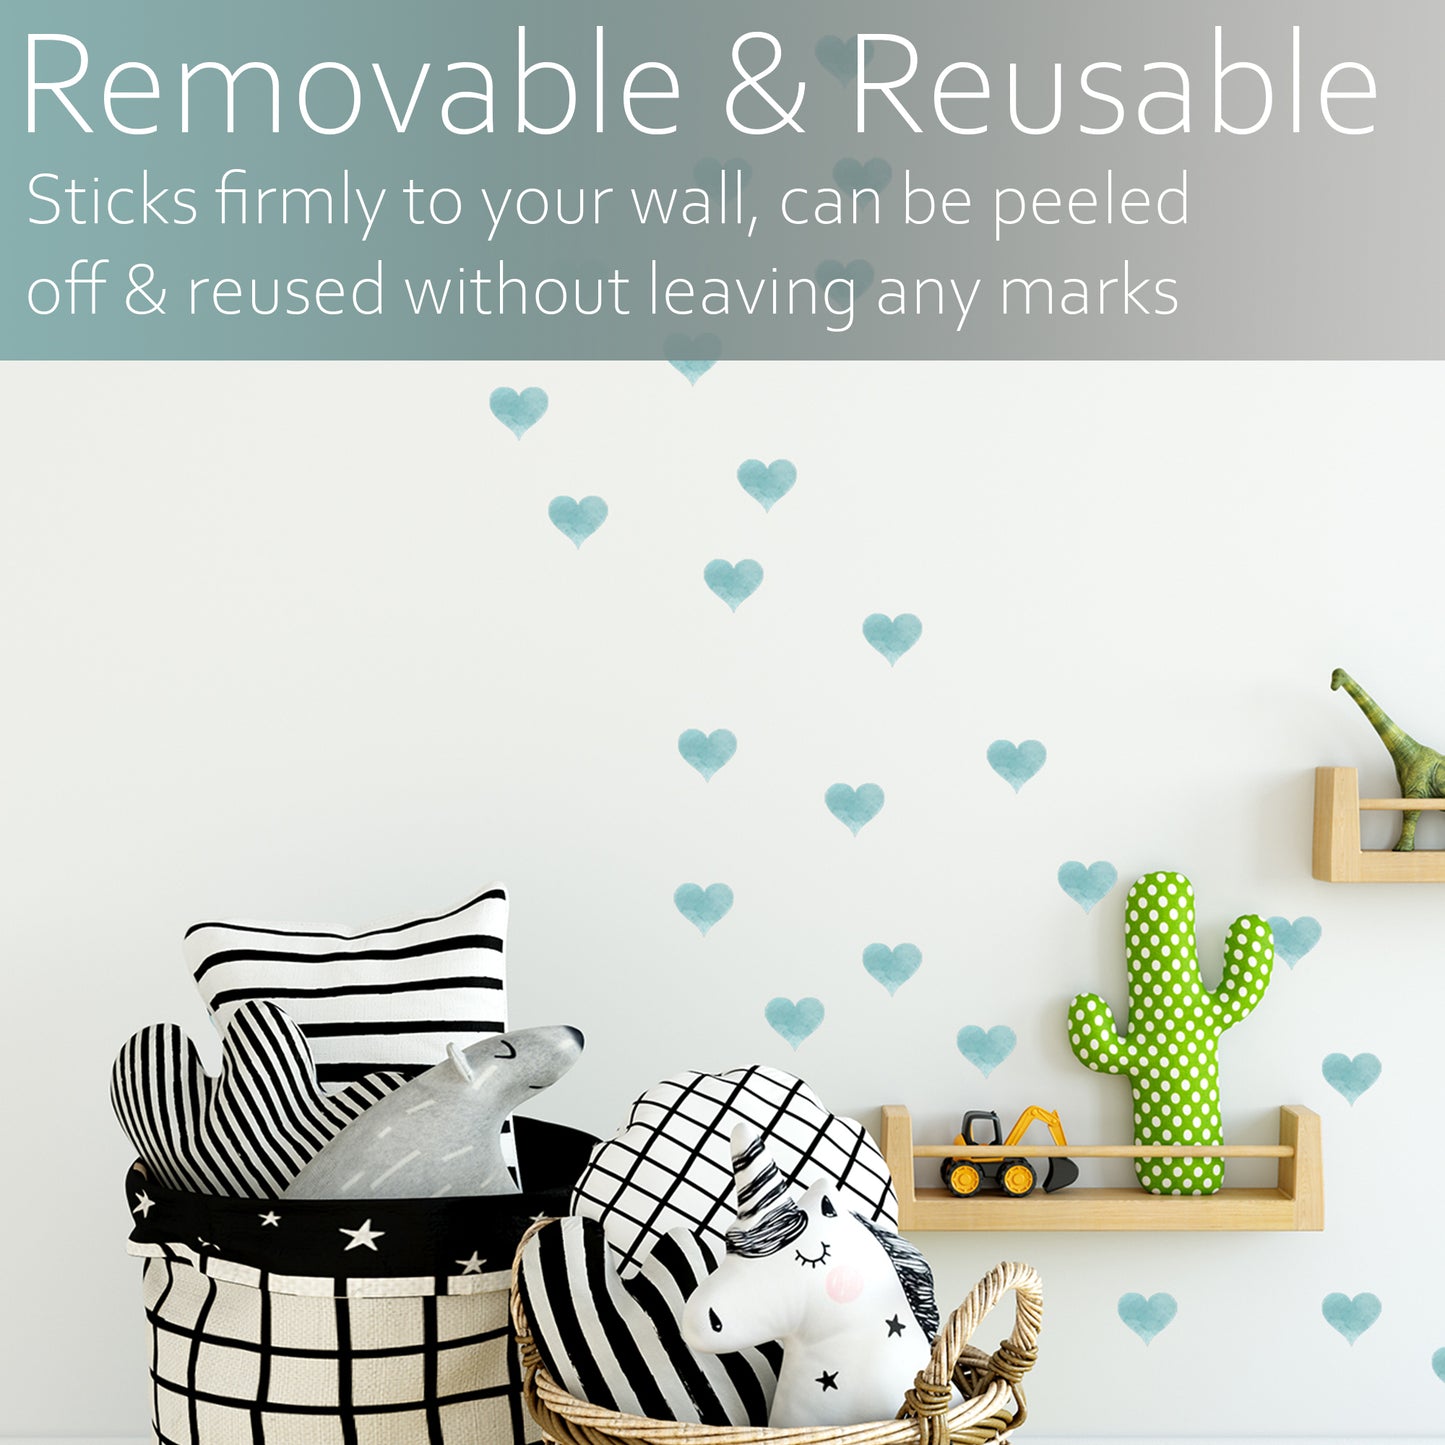 Watercolour blue hearts | Fabric wall stickers